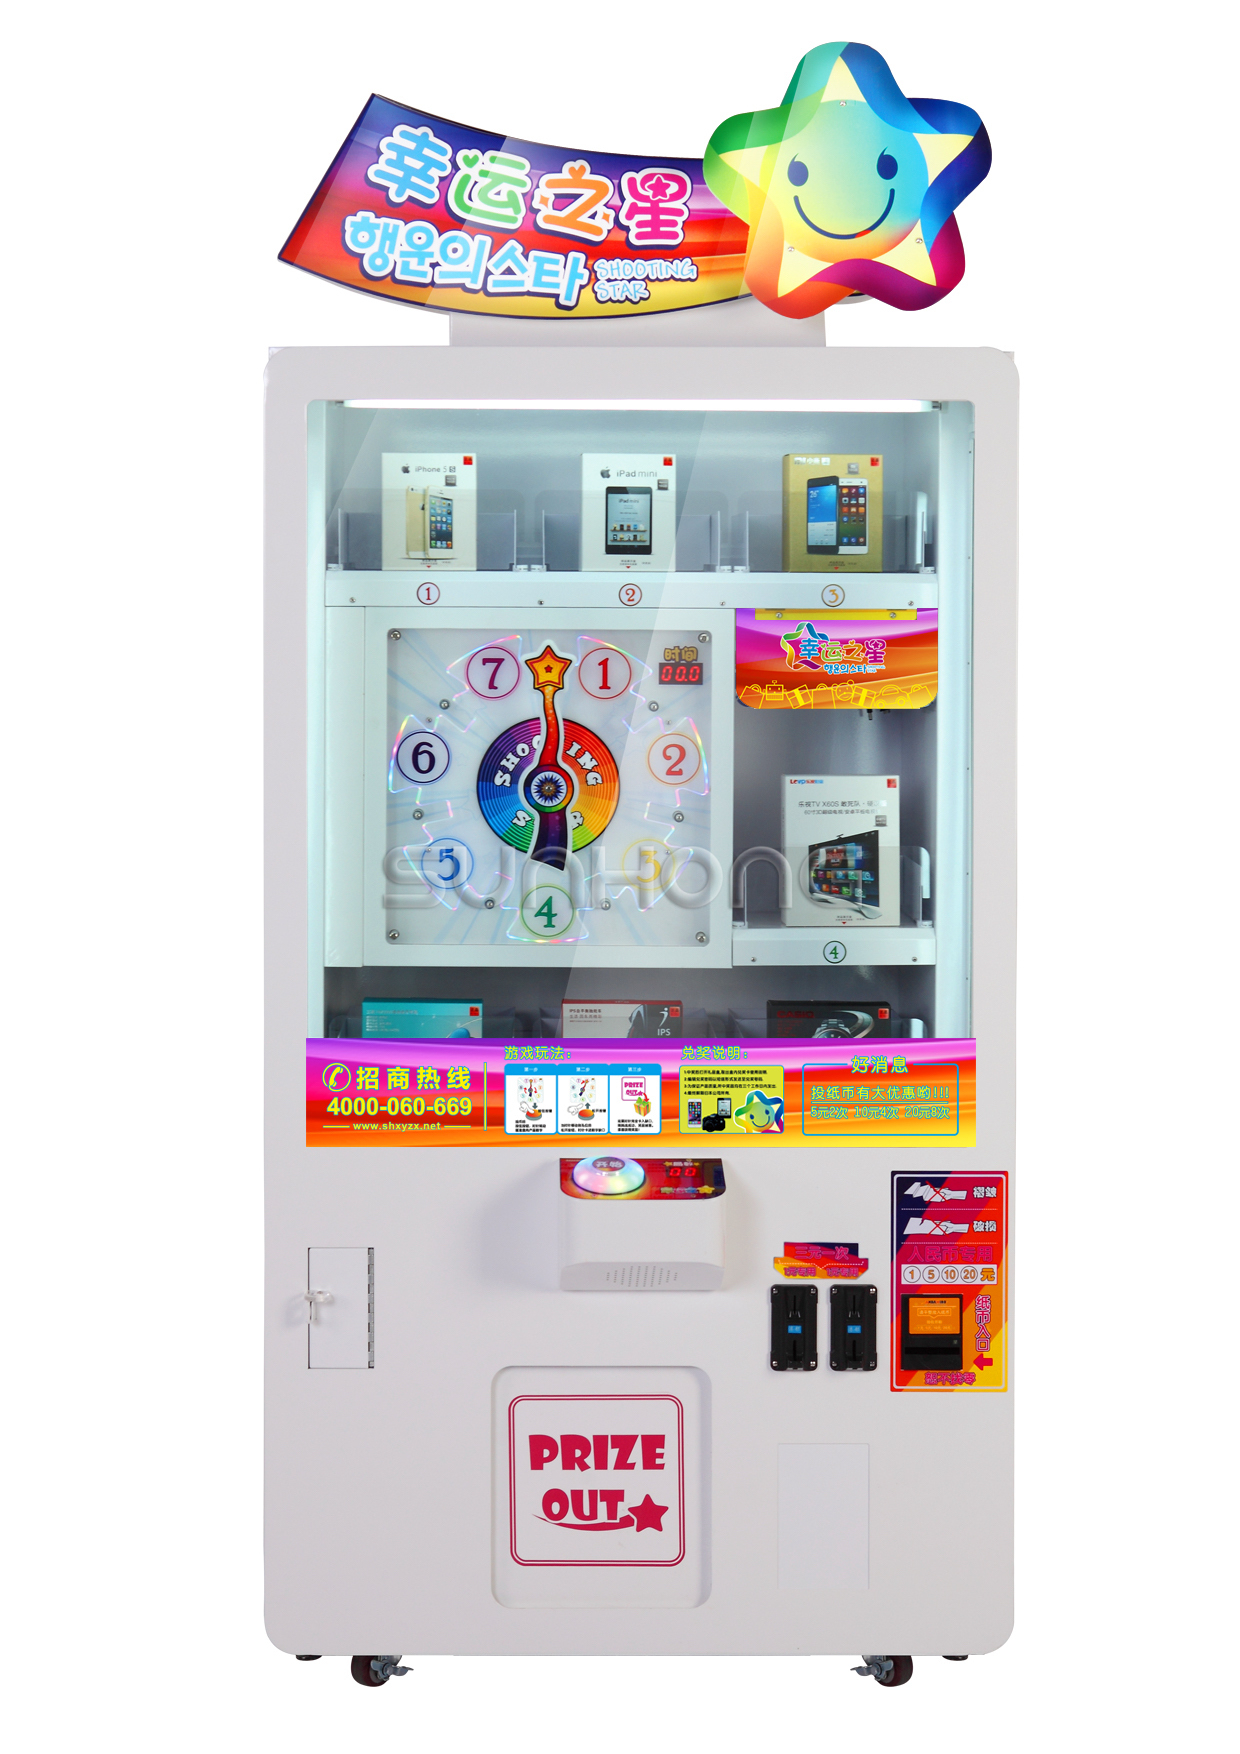  Korean Money Machine Shooting Star Different Gift Machine Coin Operated Game Machine Gifts Vending Lucky Star Magic For Fun Clip Machines 